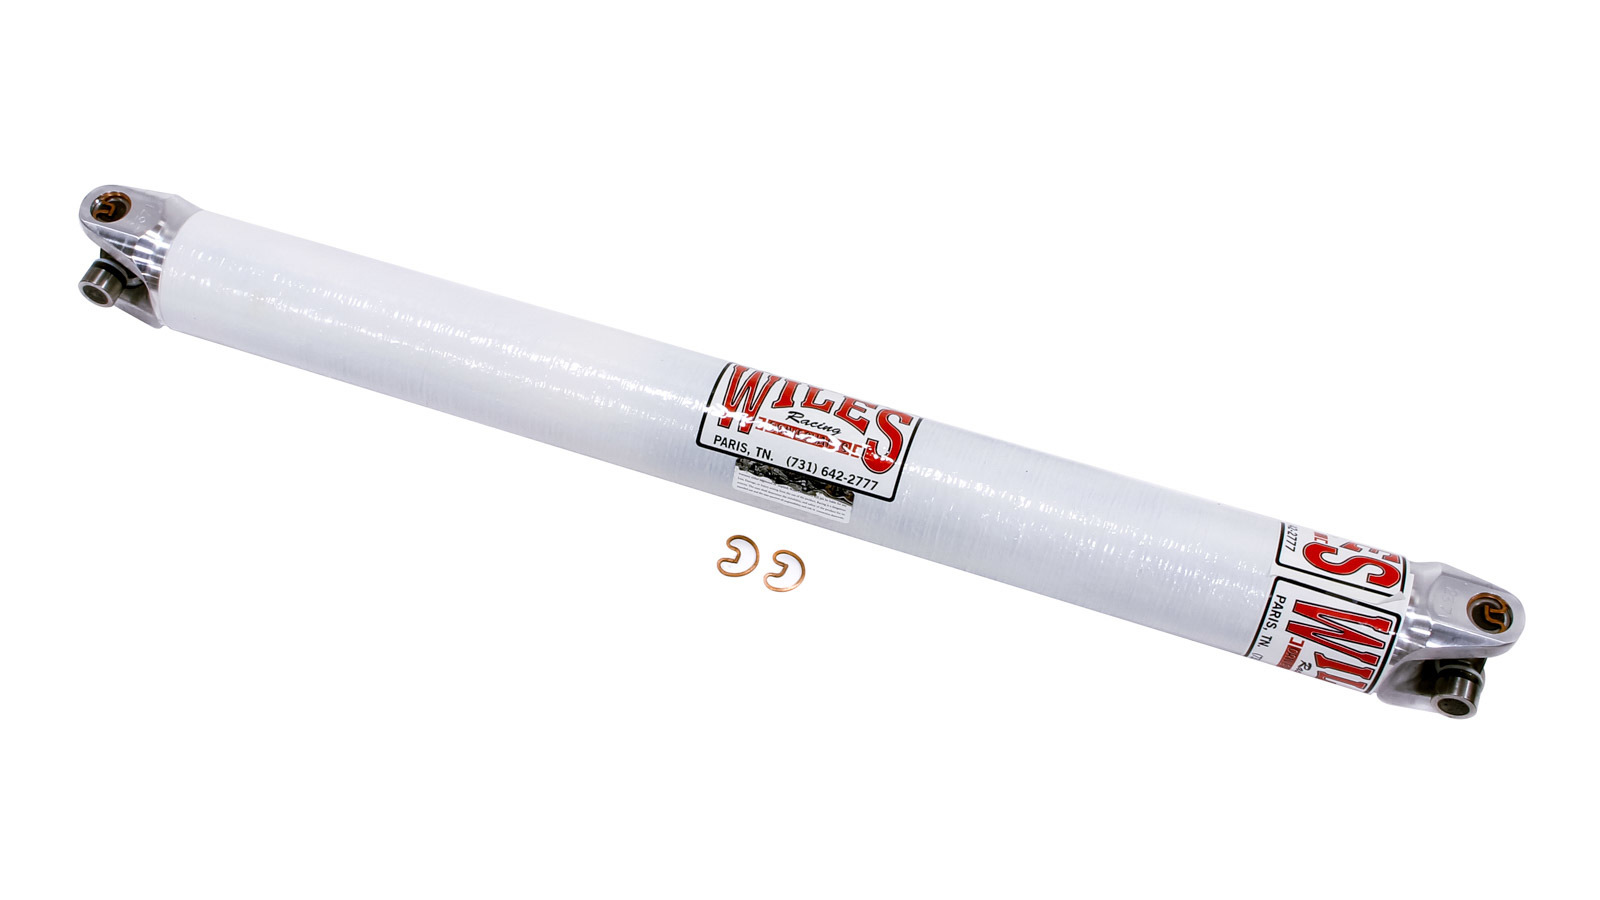 Wiles Driveshaft CF325375 Drive Shaft, 37.500 in Long, 3.25 in OD, 1310 U-Joints, Carbon Fiber, White Paint, Universal, Each